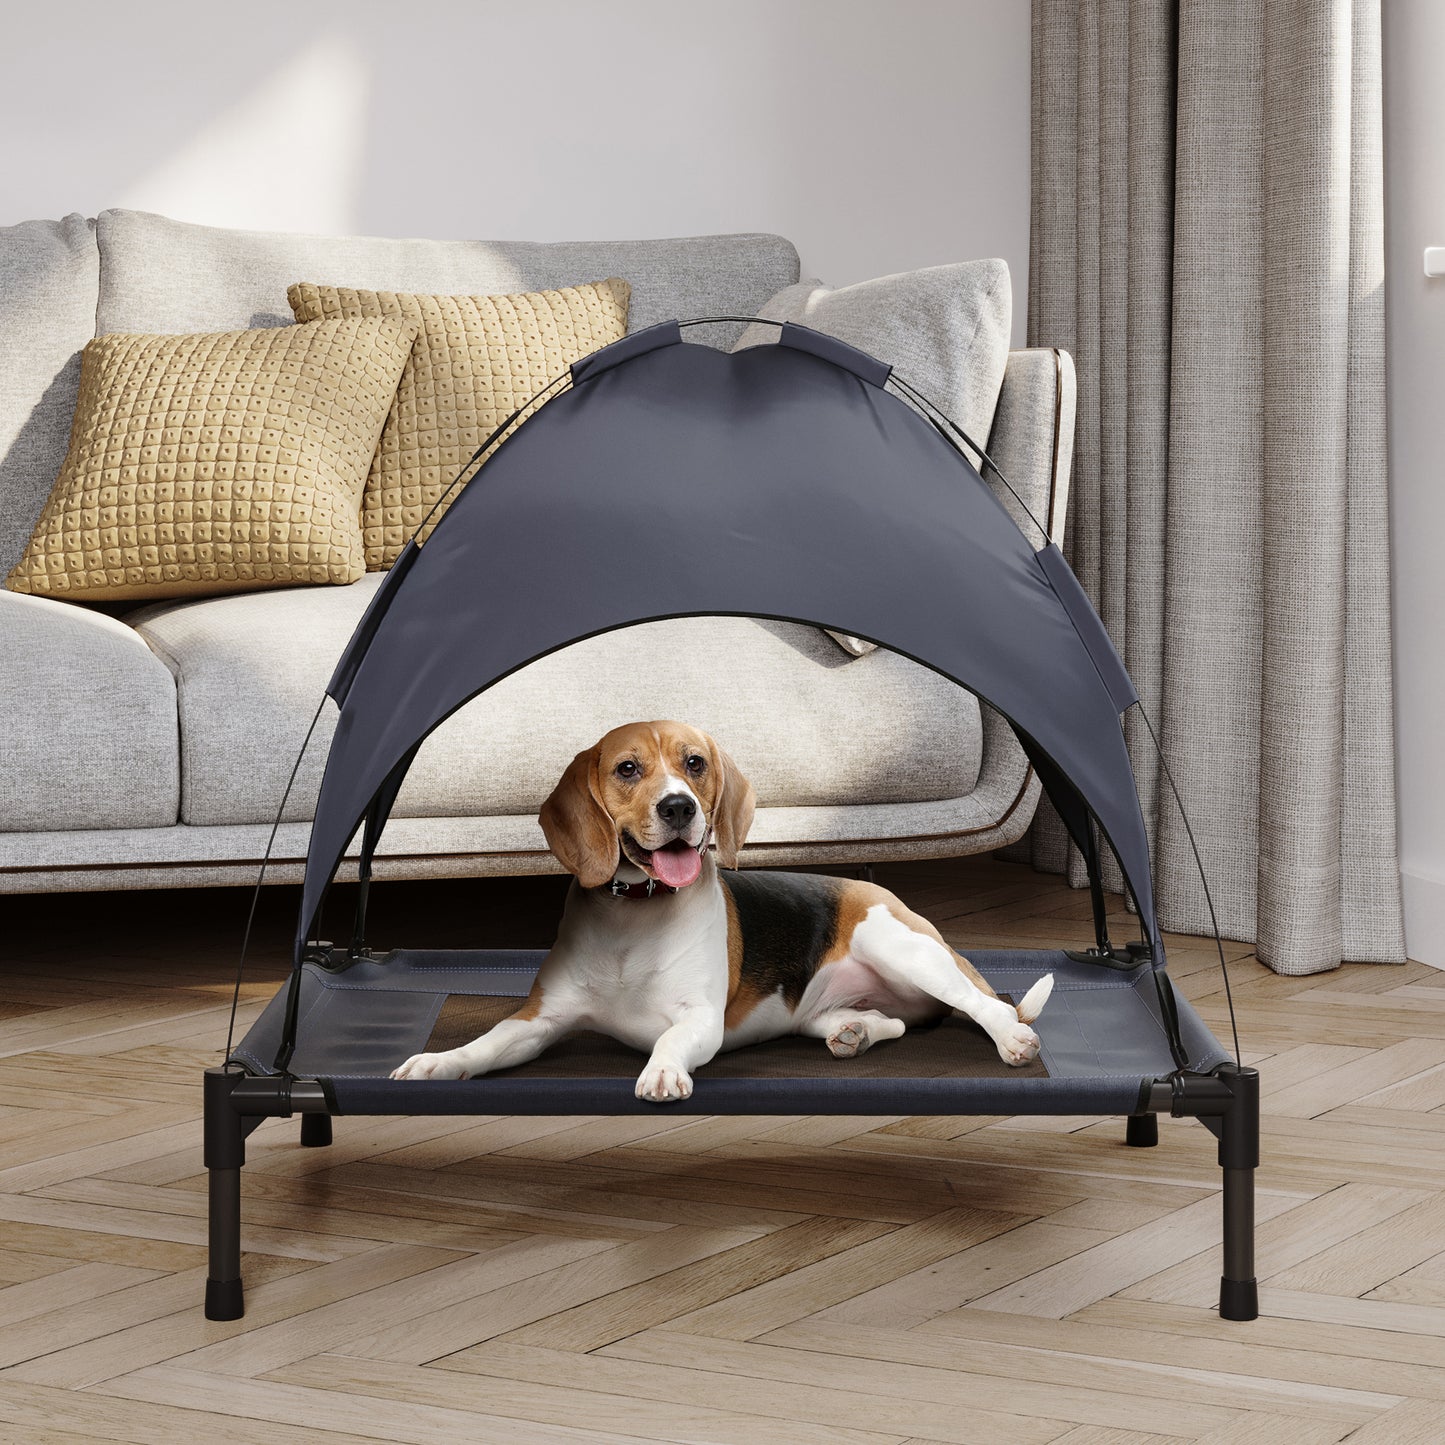 Elevated Dog Bed with Canopy